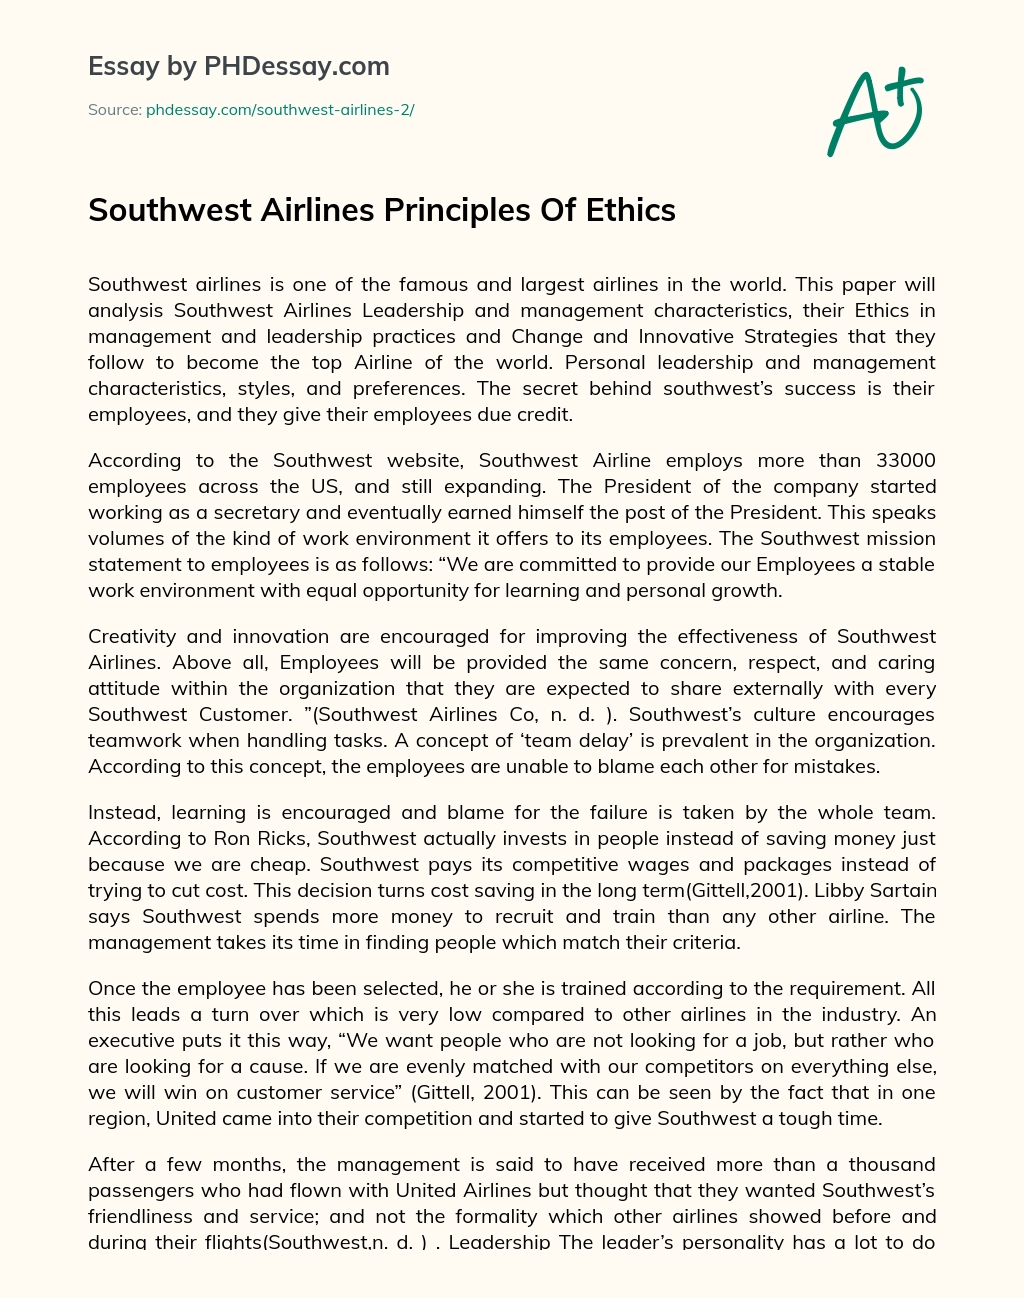 Southwest Airlines Principles Of Ethics essay